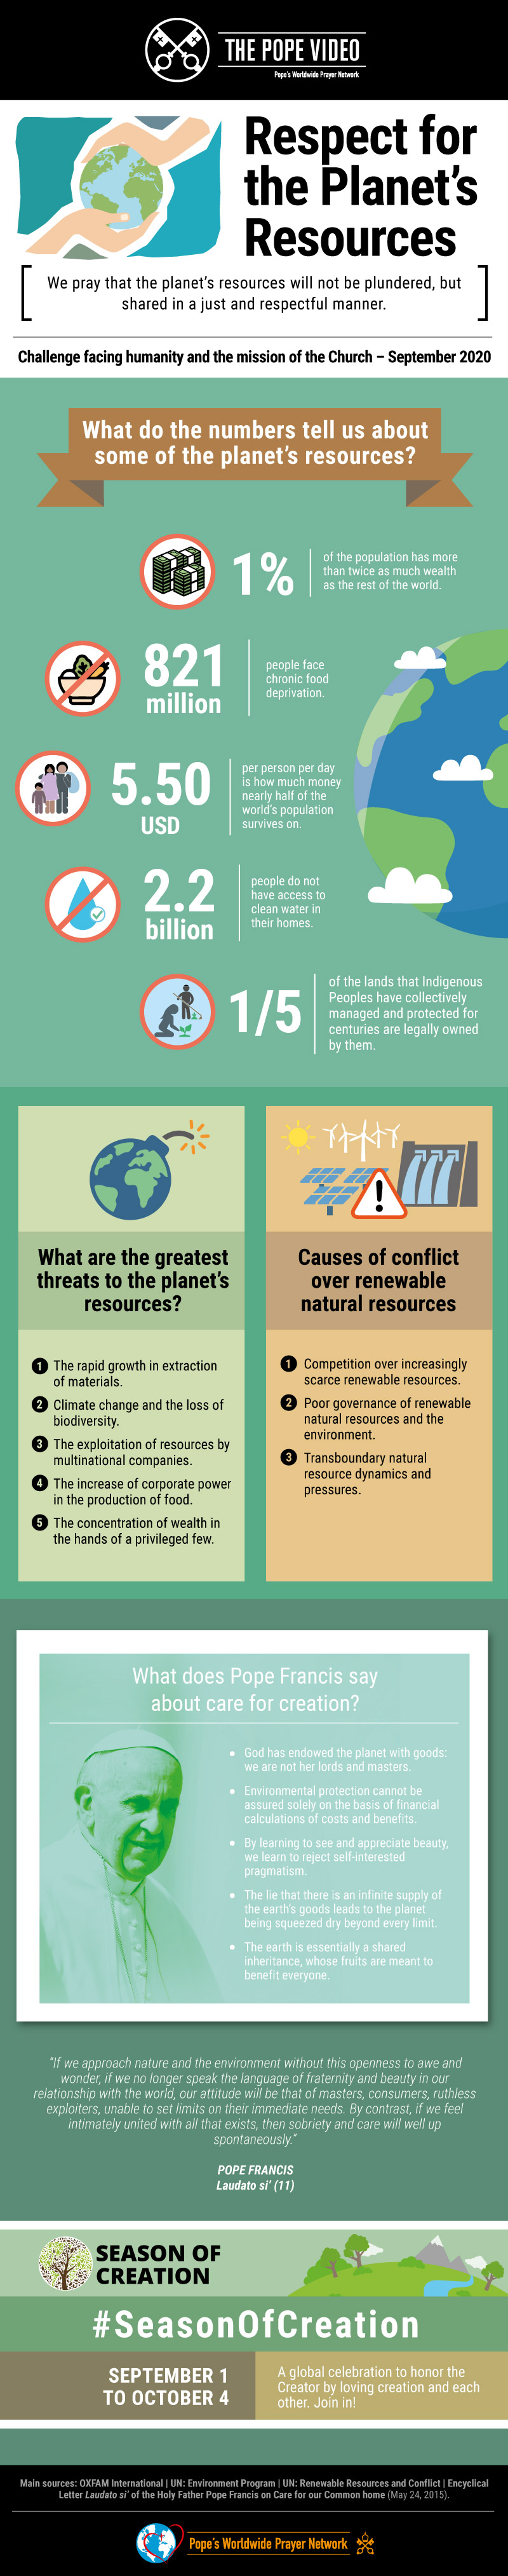 Infographic-TPV-9-2020-EN-The-Pope-Video-Respect-for-the-planets-resources-1.jpg